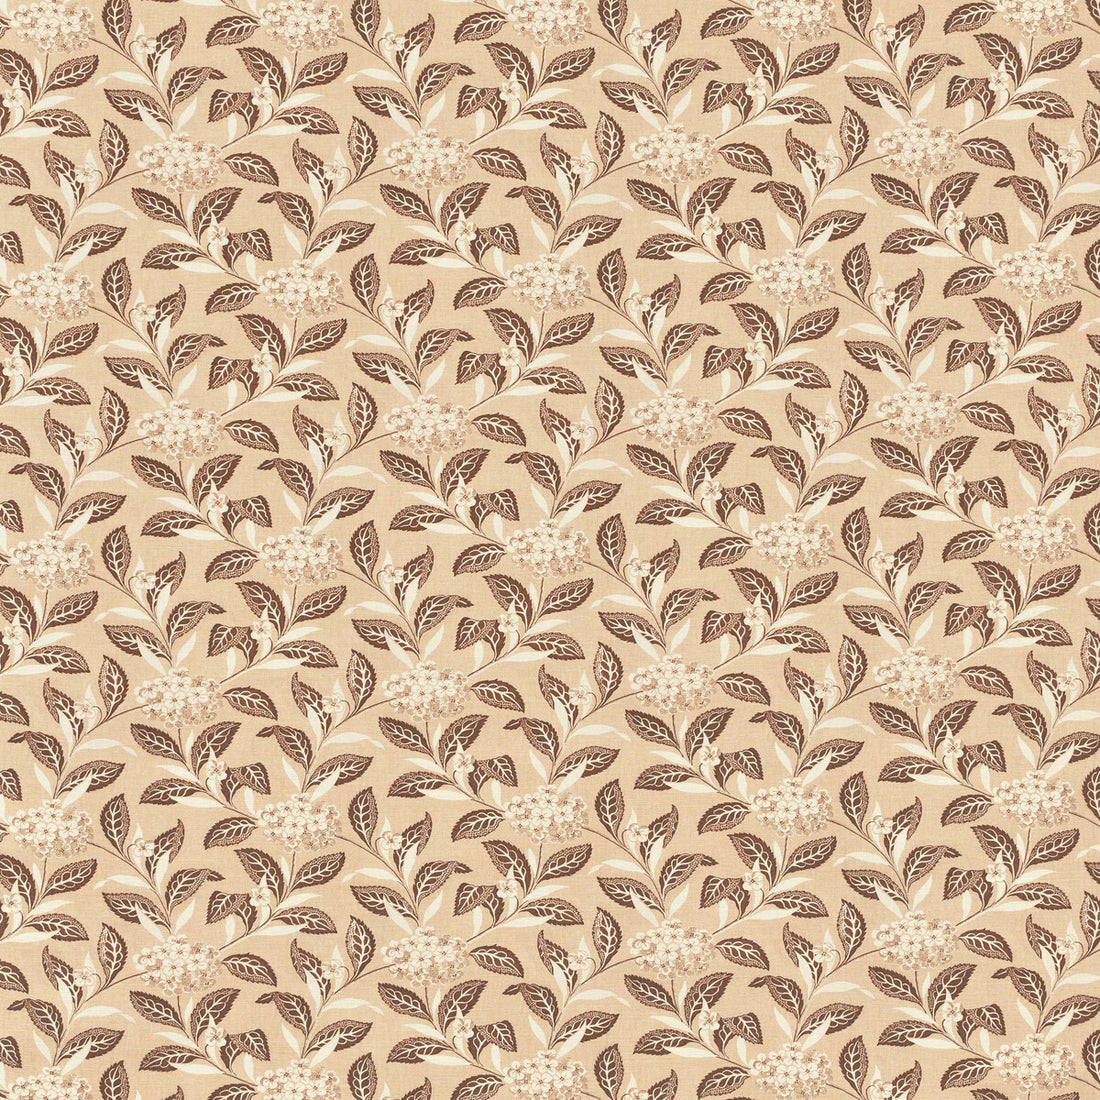 Ortensia fabric in brown on blush color - pattern 2023133.7.0 - by Lee Jofa in the Paolo Moschino Garden II collection